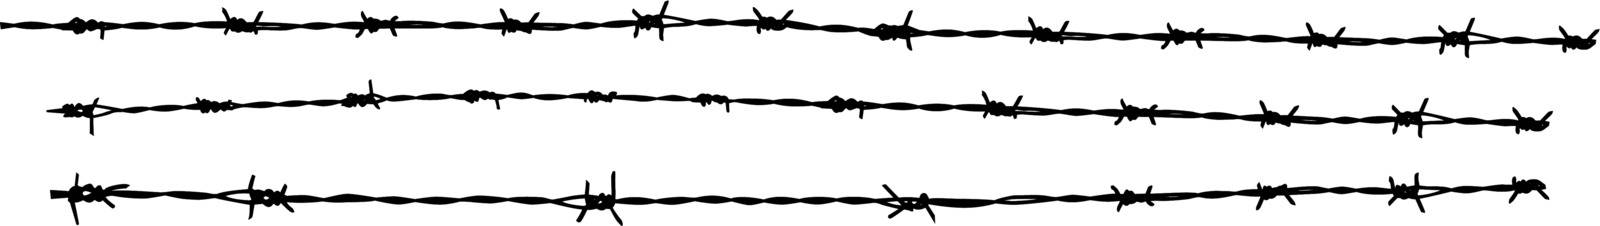 Vector illustration of barbed wire silhouette